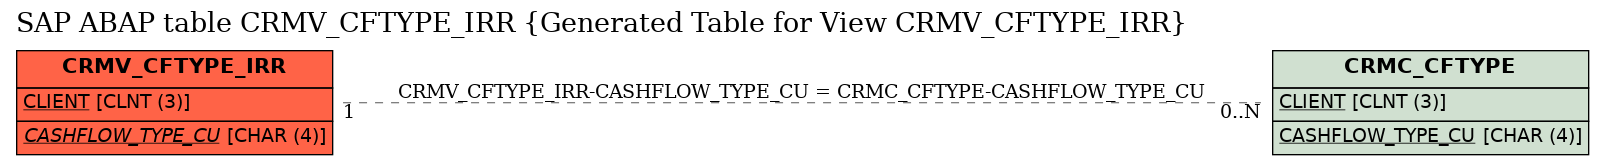 E-R Diagram for table CRMV_CFTYPE_IRR (Generated Table for View CRMV_CFTYPE_IRR)